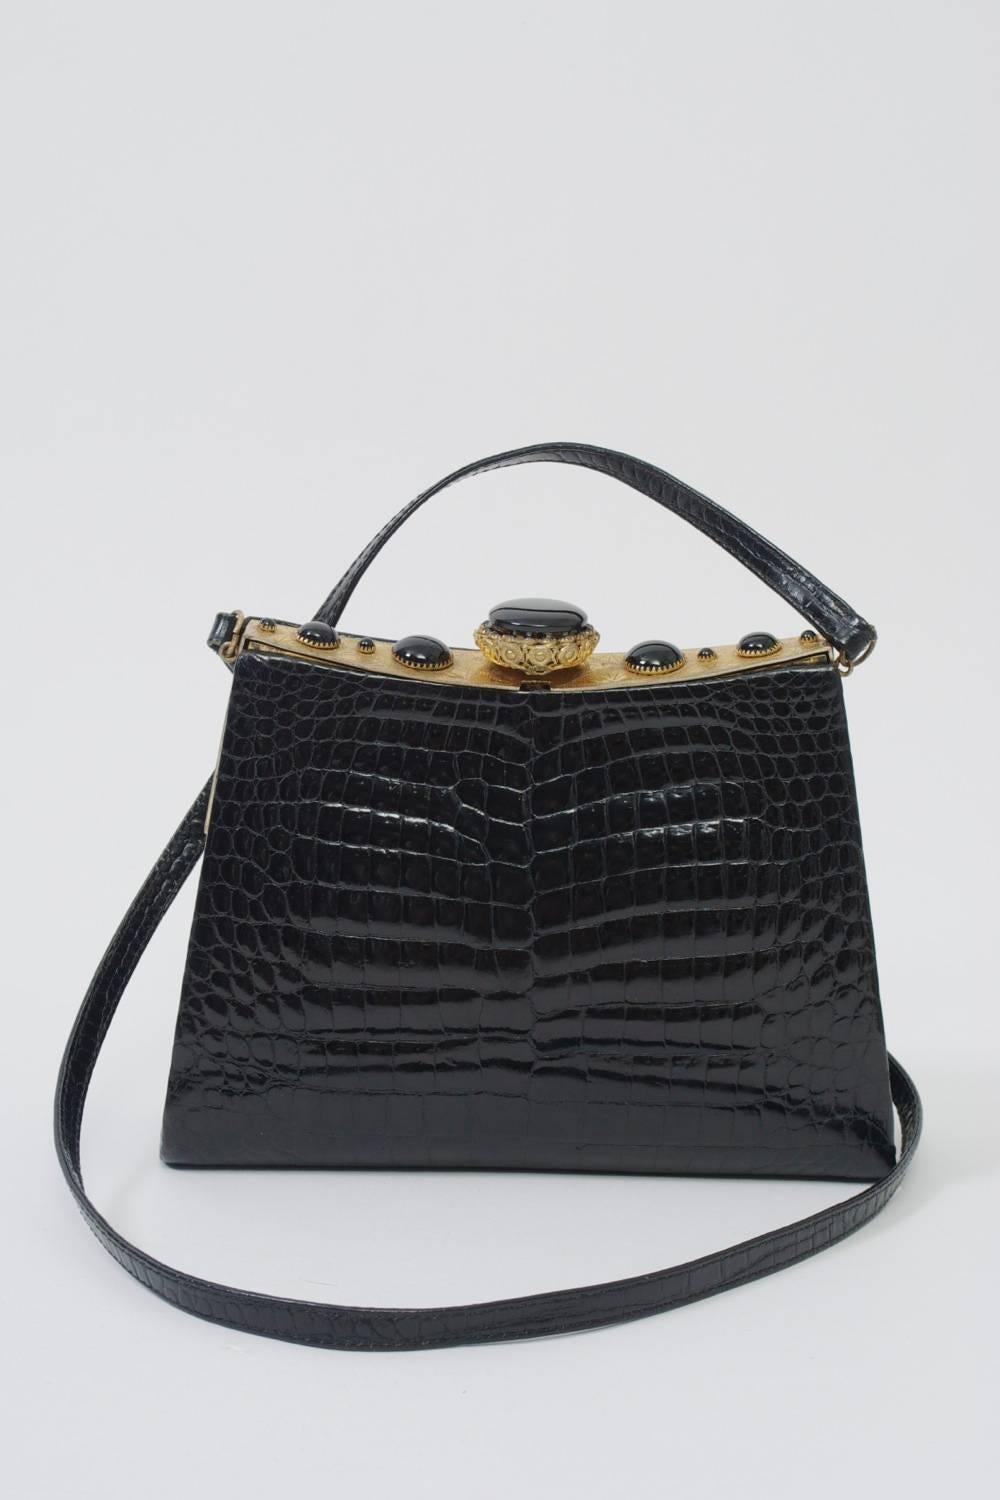 Shoulder bag of black crocodile featuring an incised  gold metal frame decorated with graduated black cabochons centering a larger one in a filigree mounting. Narrow croc shoulder strap. Black leather interior with zippered  compartment.